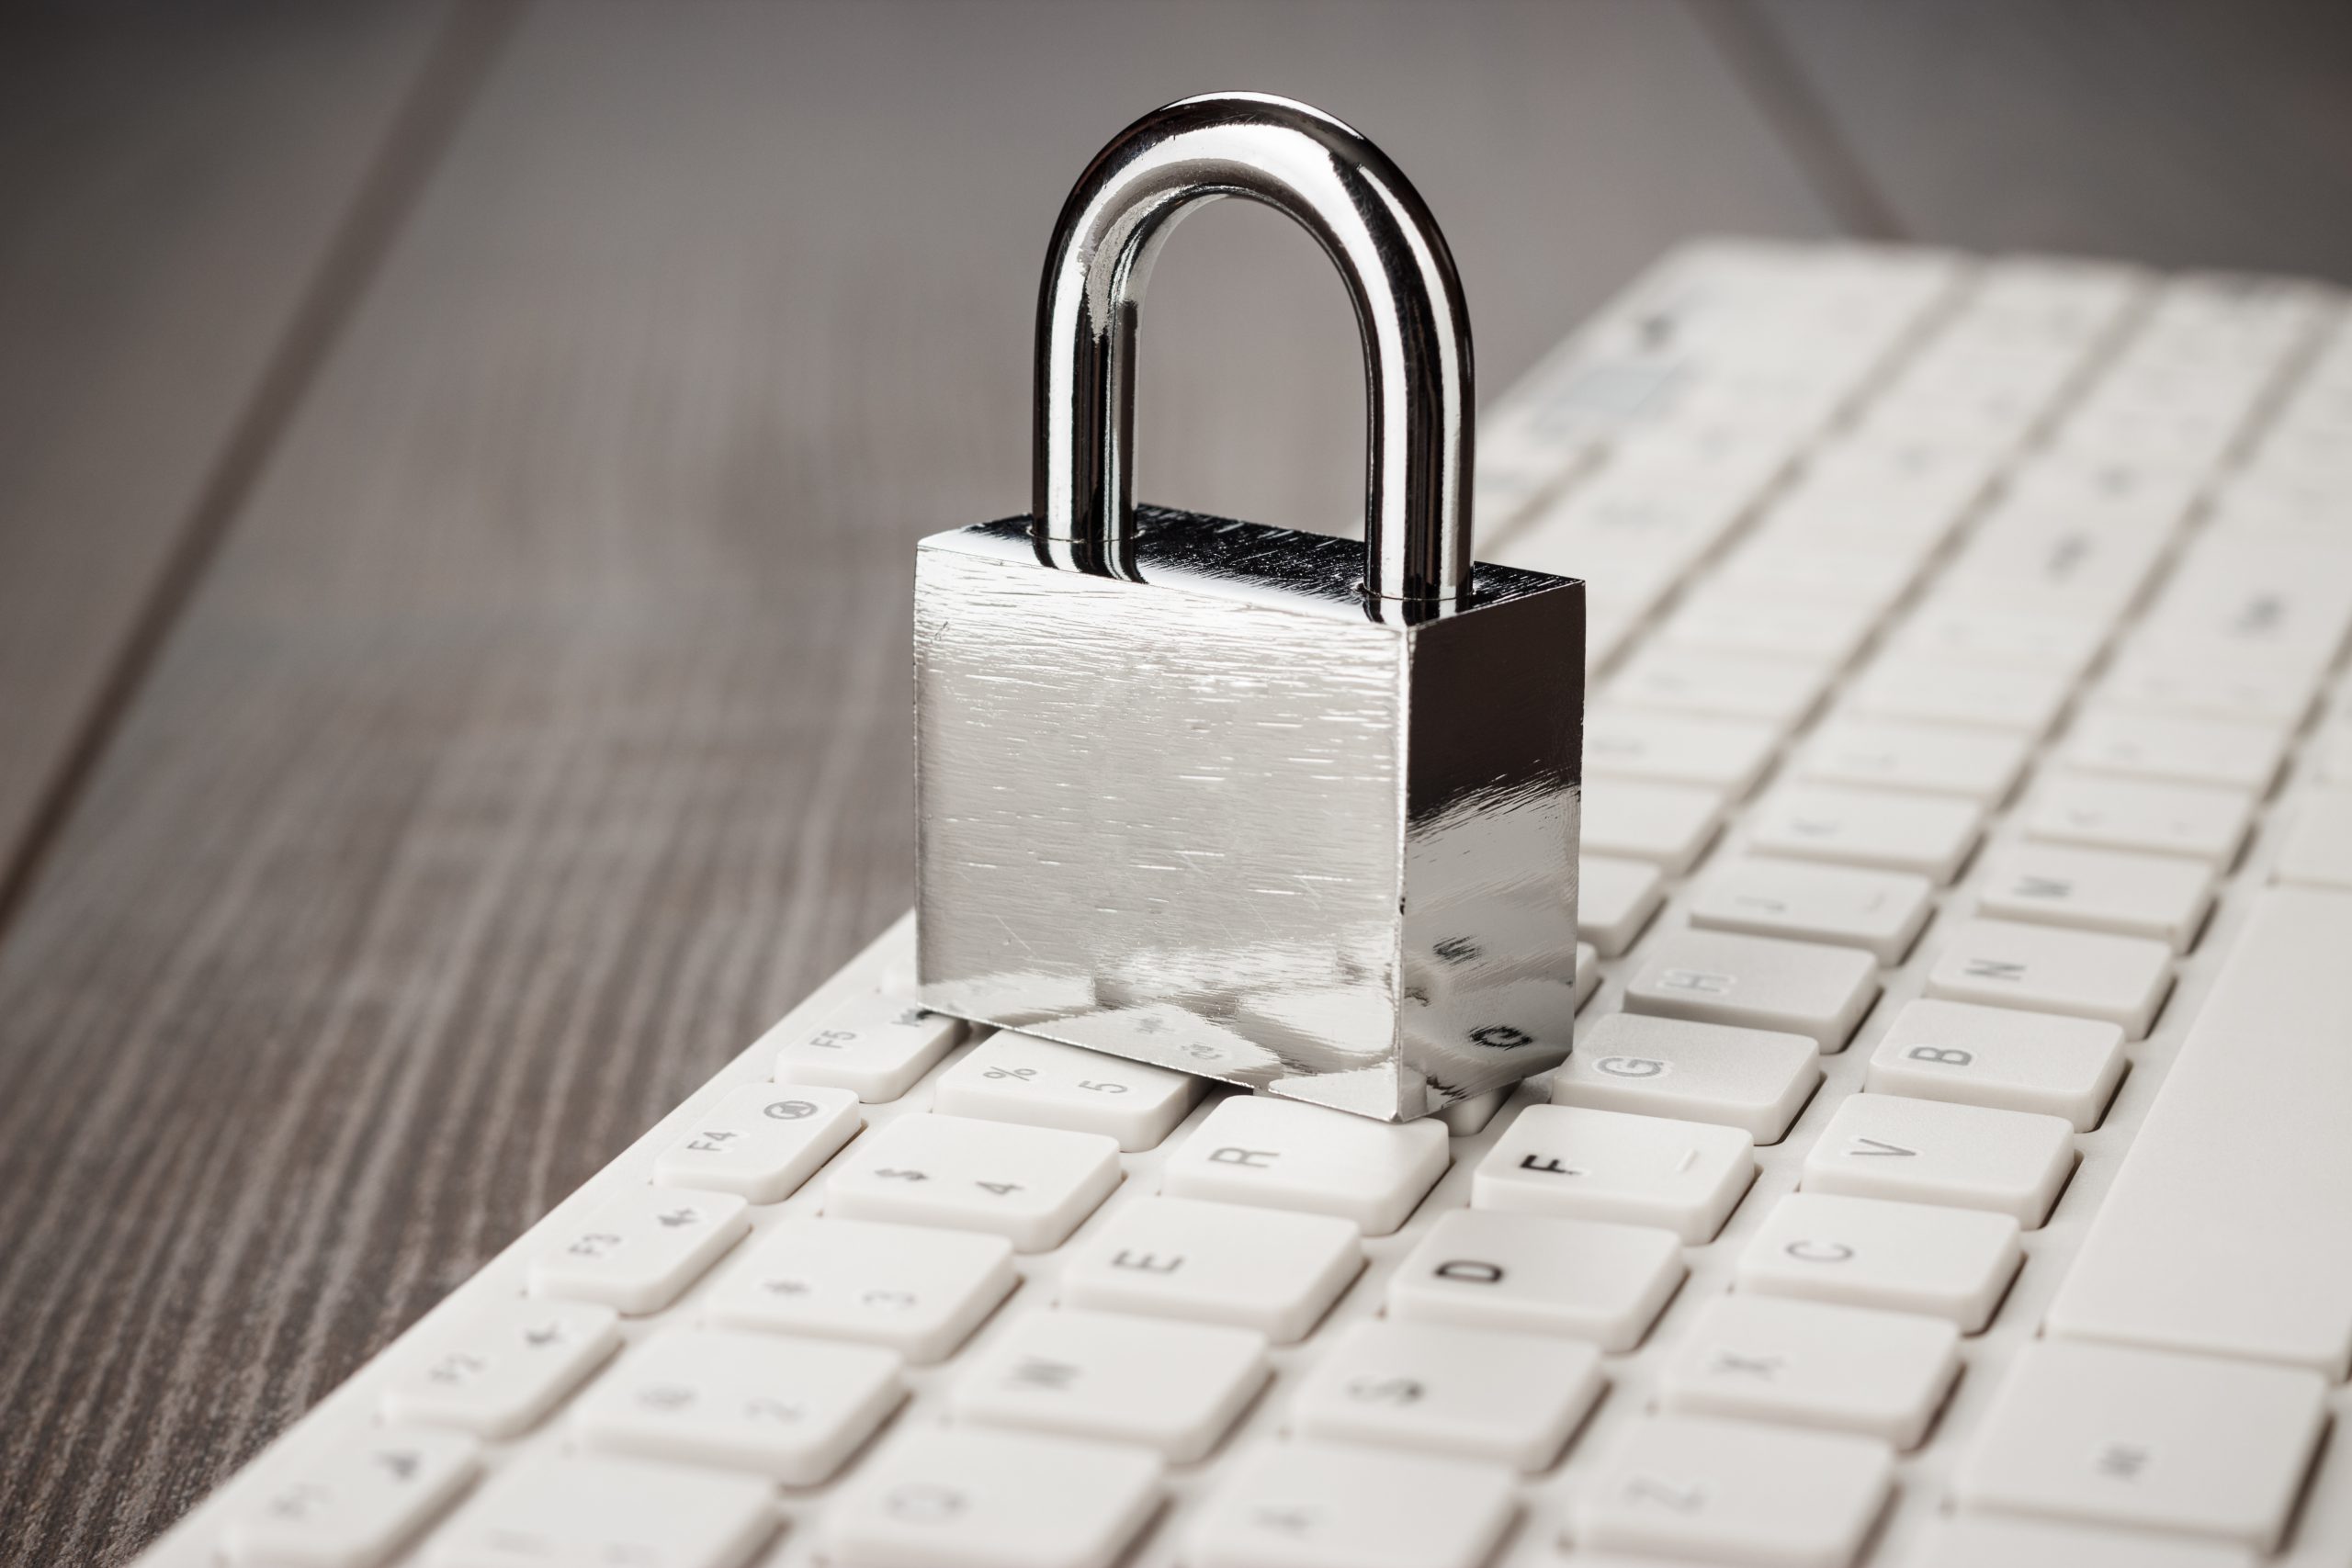 padlock-and-white-computer-keyboard-on-the-wooden--PWWDMLF